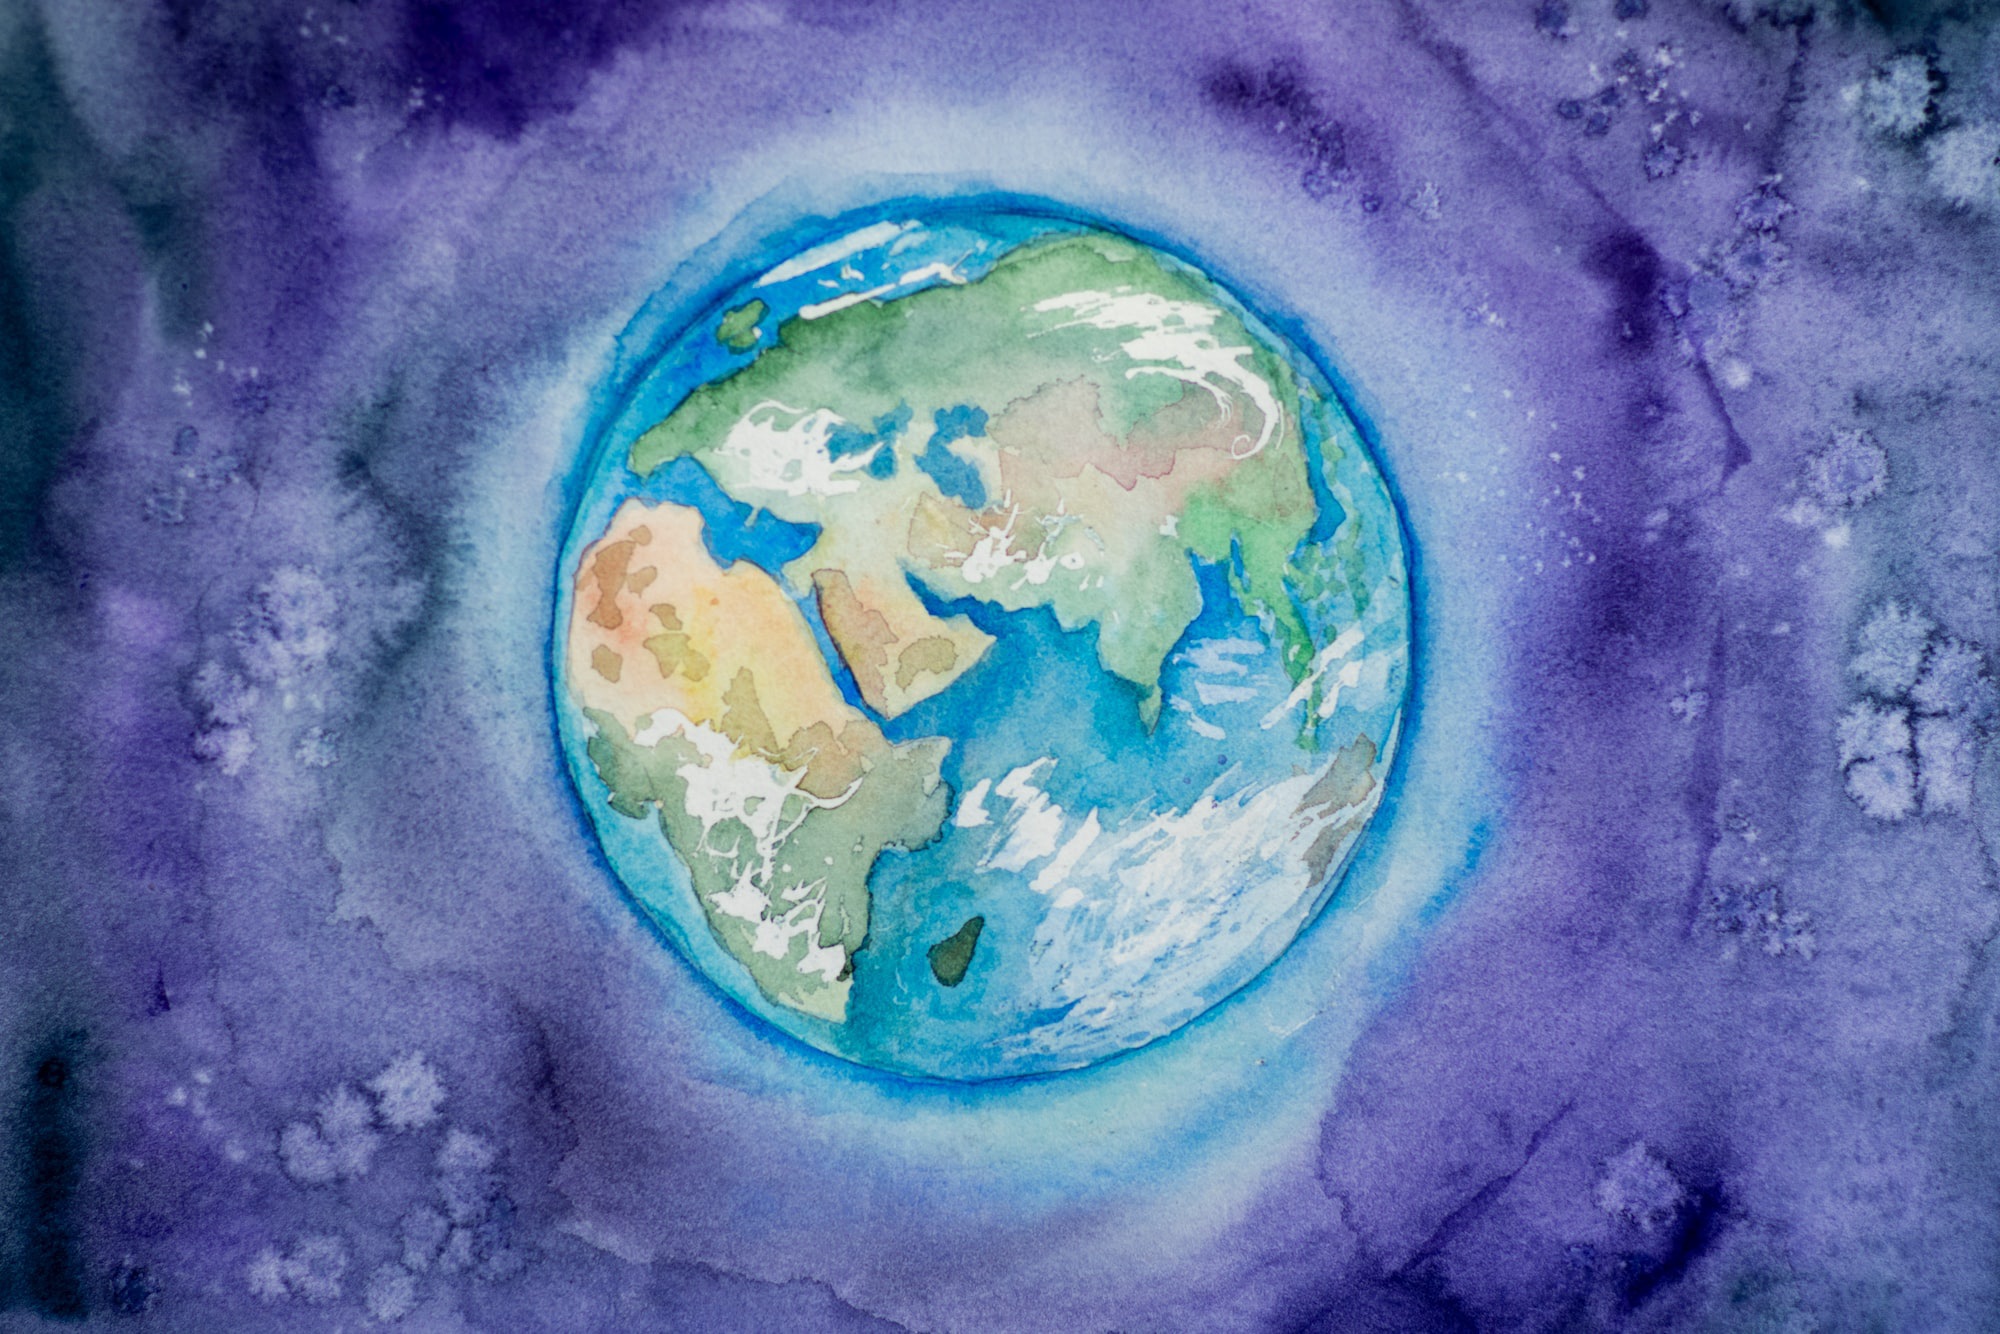 Painted image of the earth